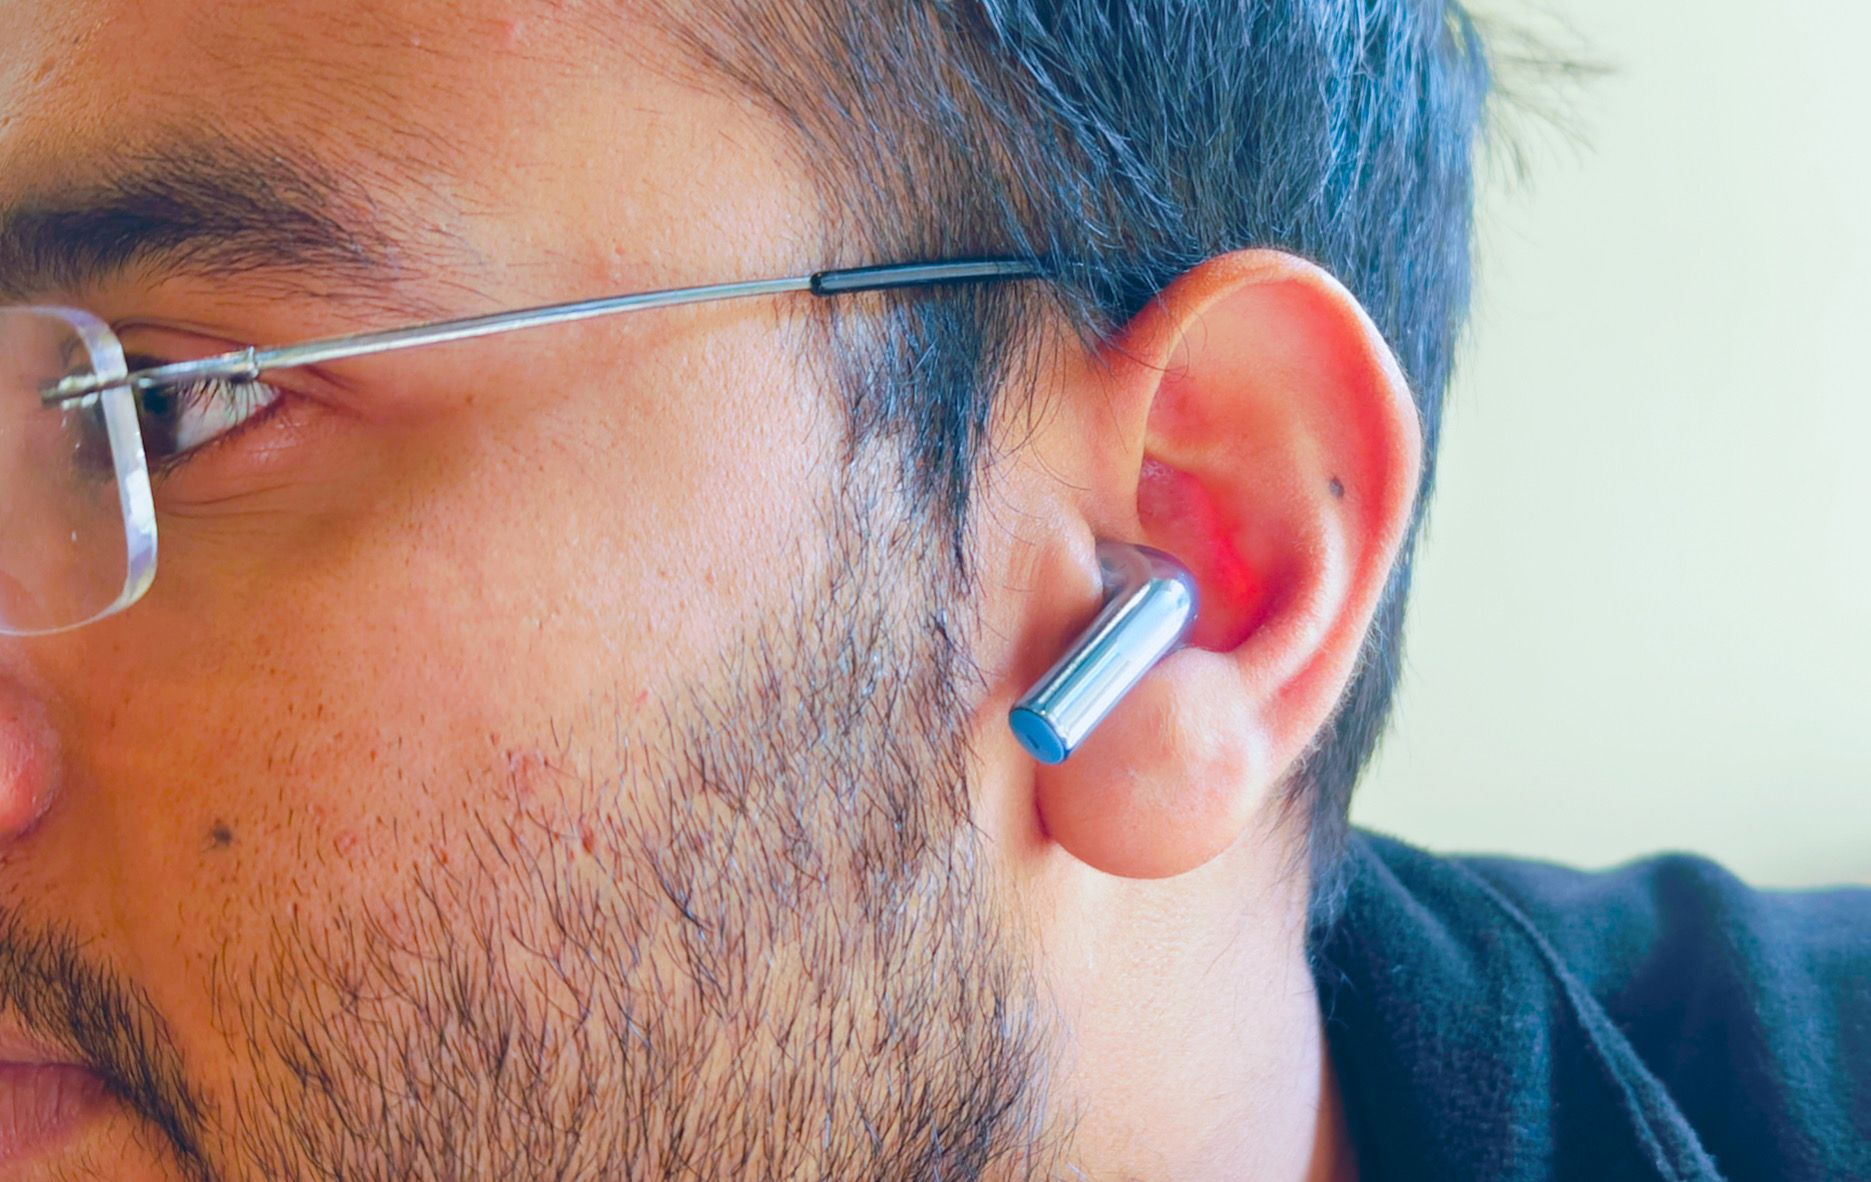 OnePlus Buds 3 Review: Terrific earbuds won’t leave you moanin’ & bitchin’ for more